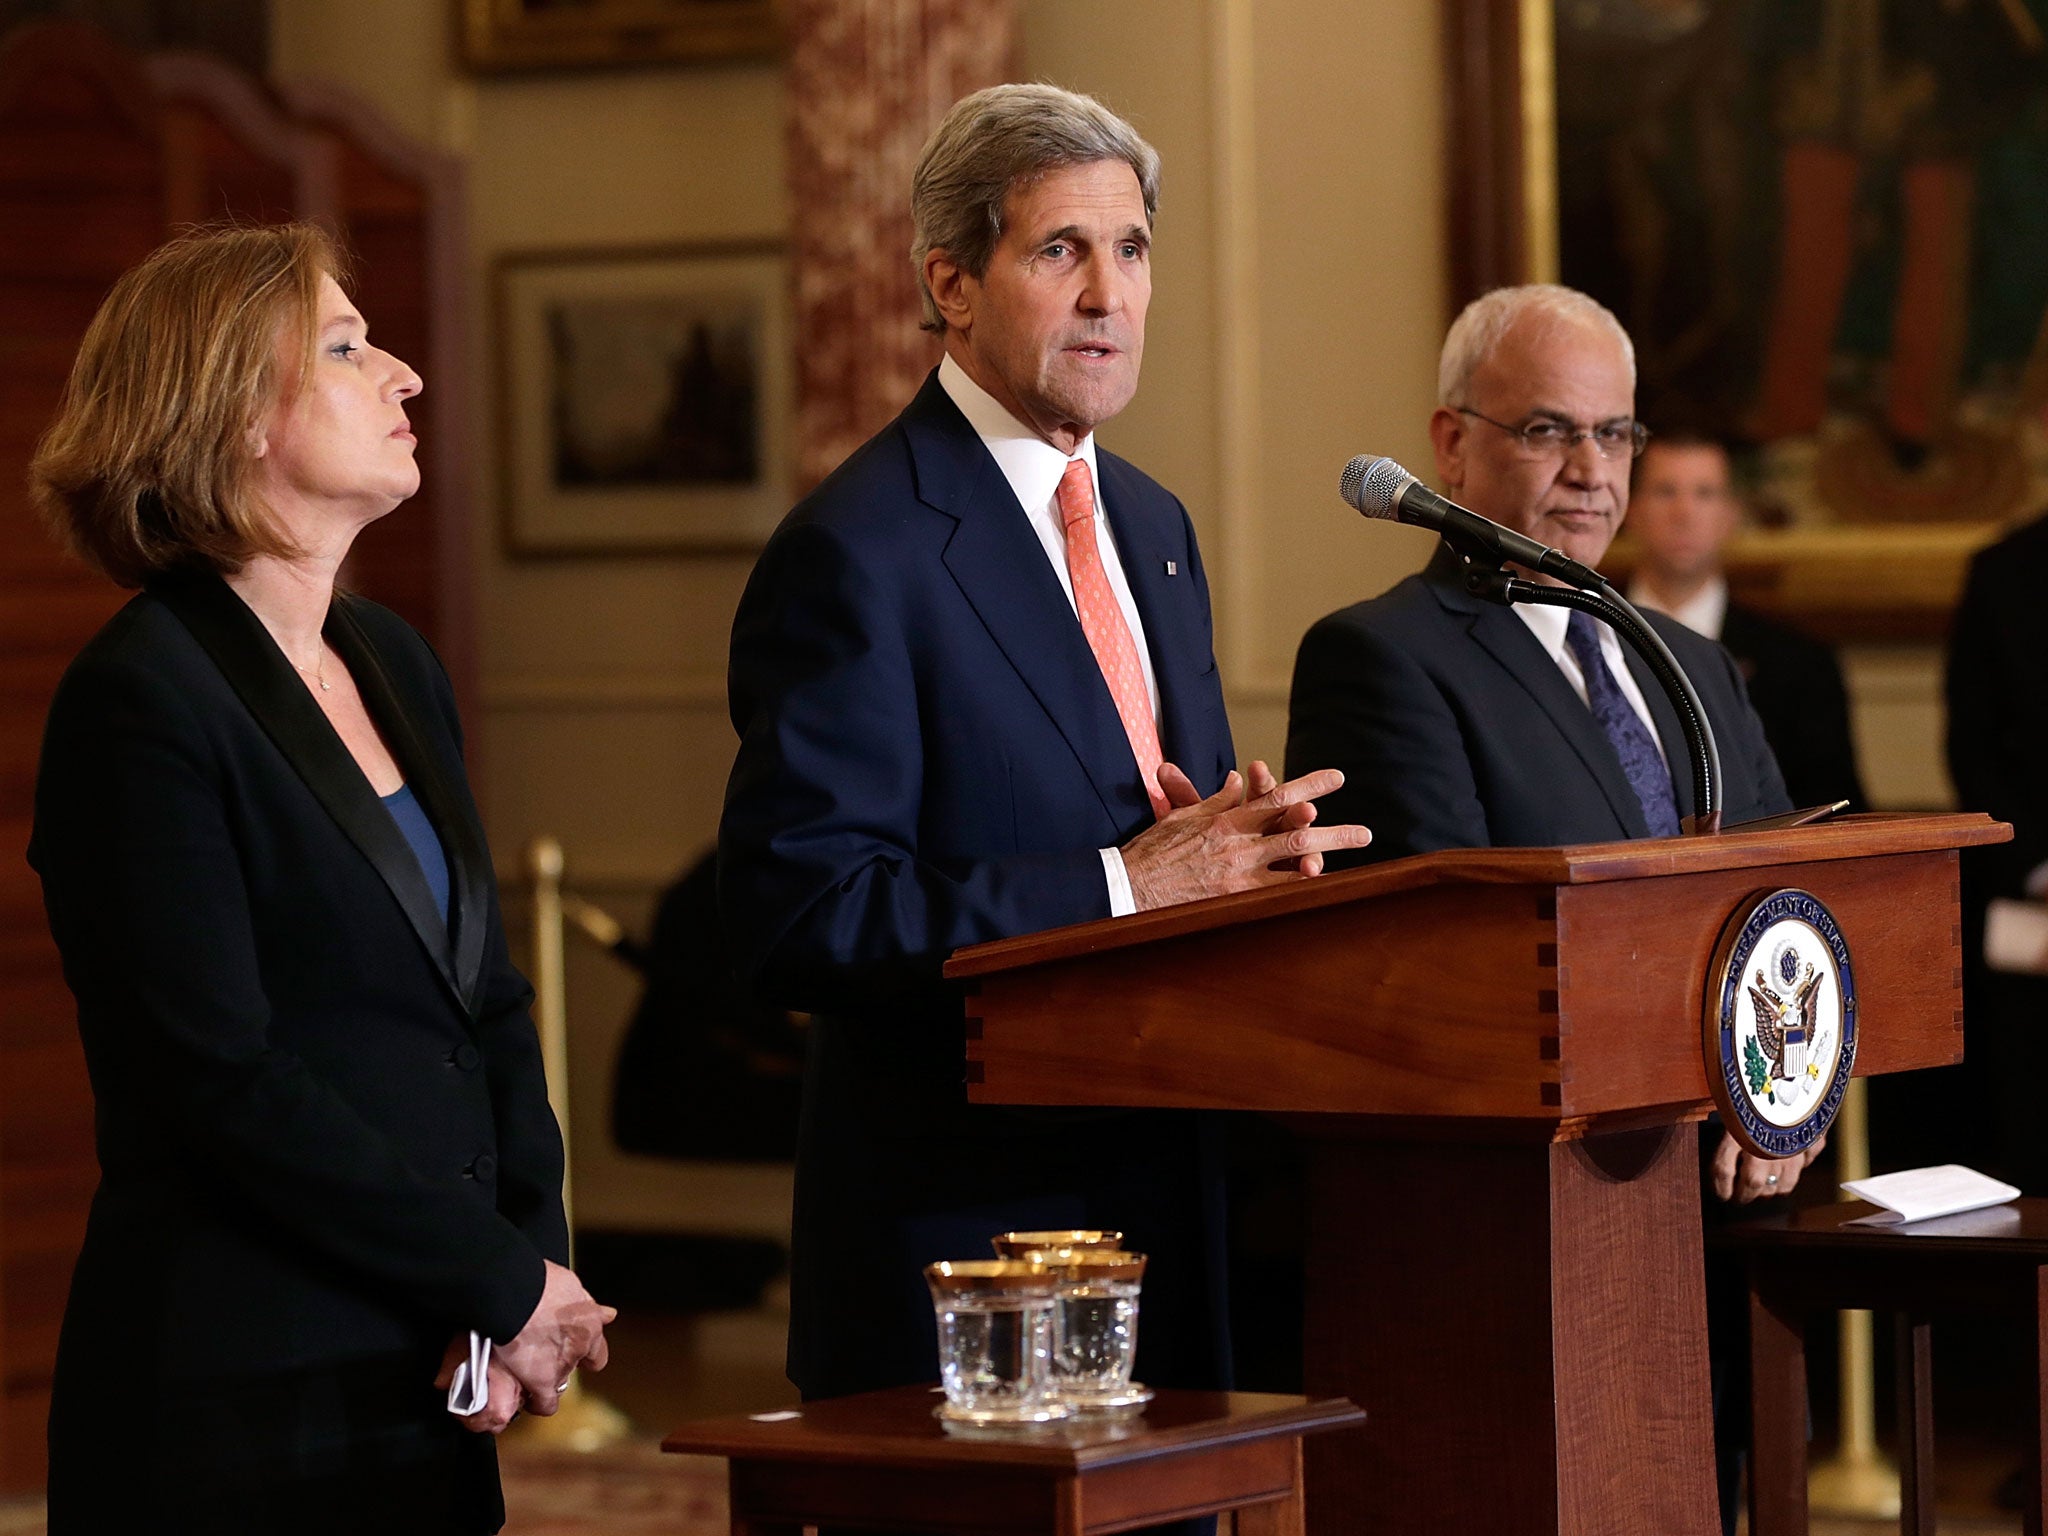 U.S. Secretary of State John Kerry (C) makes a statement with Israeli Justice Minister Tzipi Livni (L) and Palestinian chief negotiator Saeb Erekat (R) during a press conference on the Middle East Peace Process Talks at the Department of State on July 30, 2013 in Washington, DC. Israeli Justice Minister Tzipi Livni and Palestinian chief negotiator Saeb Erekat joined Kerry in some of the first direct talks in three years between Israel and Palestine.